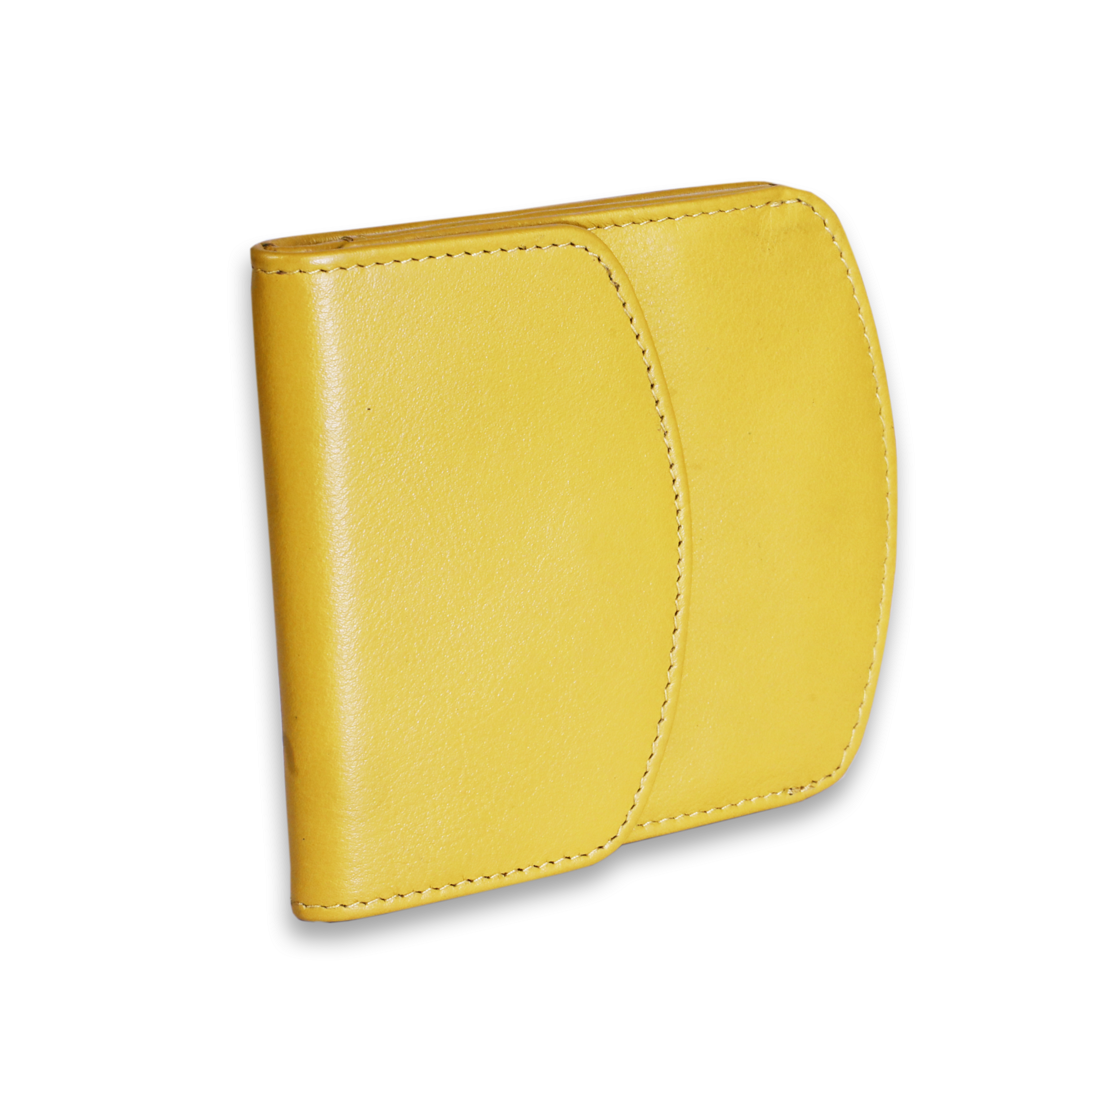 Leather Solid Yellow Women Pocket Wallet